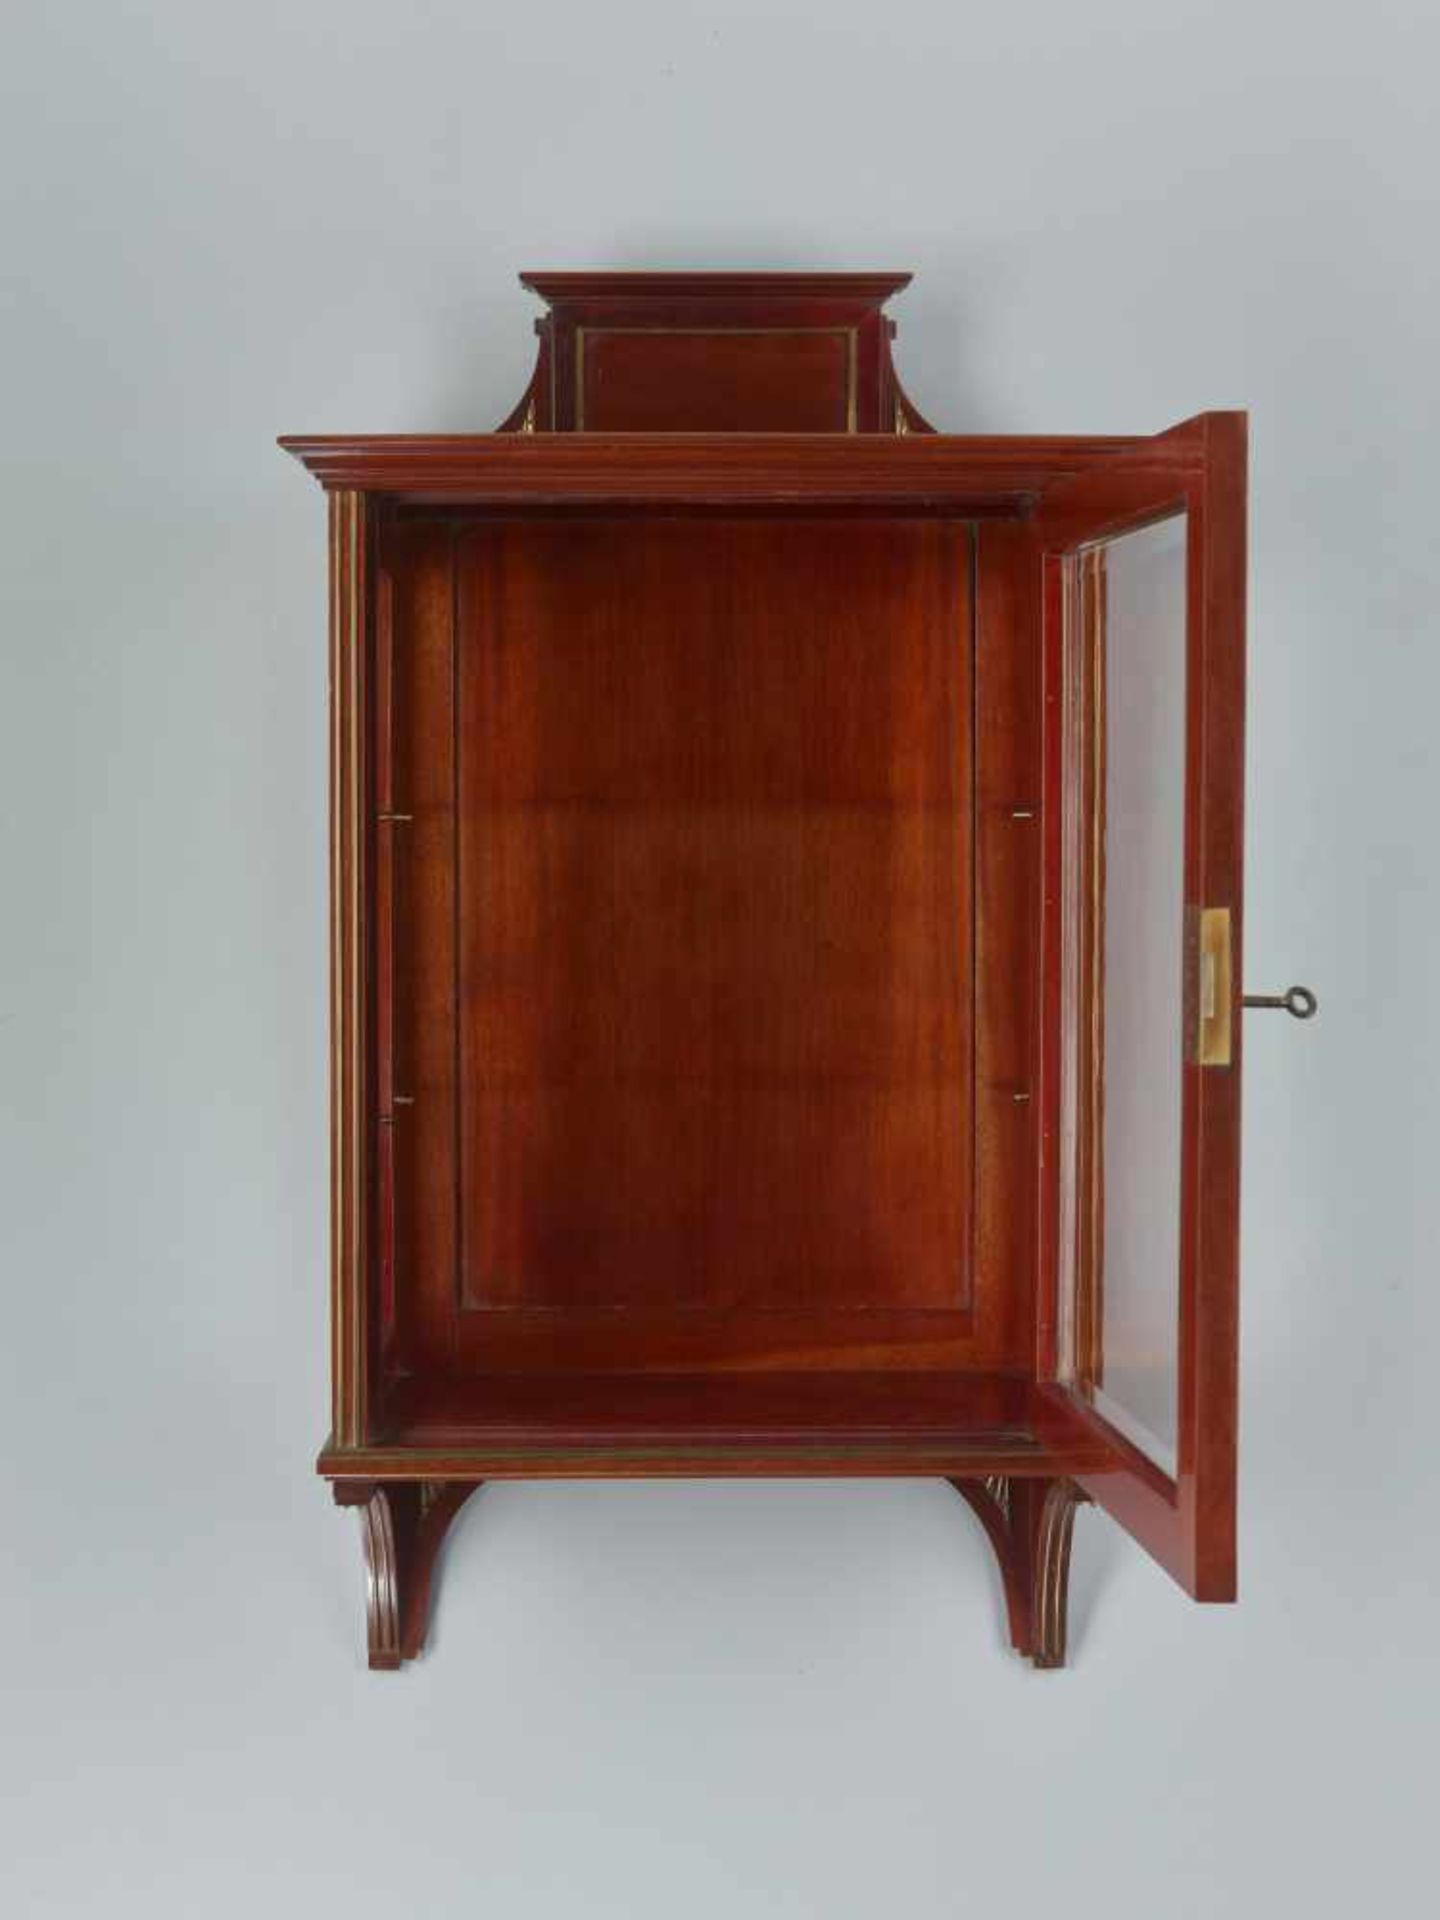 A 19th CENTURY VIENNA MAHOGANY WALL DISPLAY CABINET WITH BRASS APPLICATIONSMahogany, glass and brass - Image 3 of 7